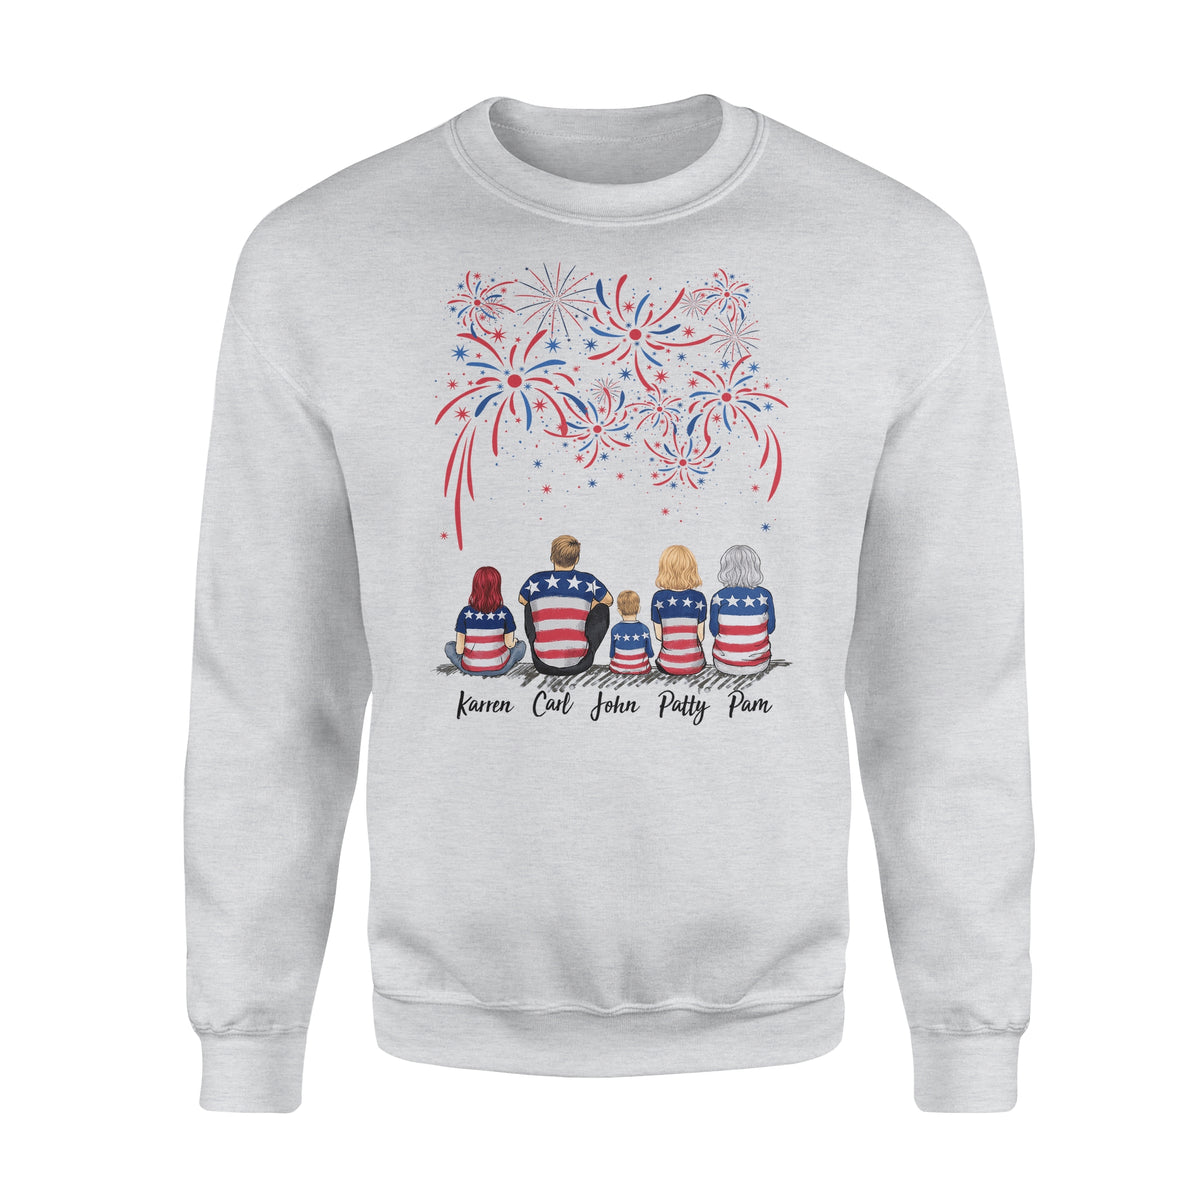 Personalized family members Sweatshirt 4th Of July gift for the whole family - UP TO 5 PEOPLE - 2426